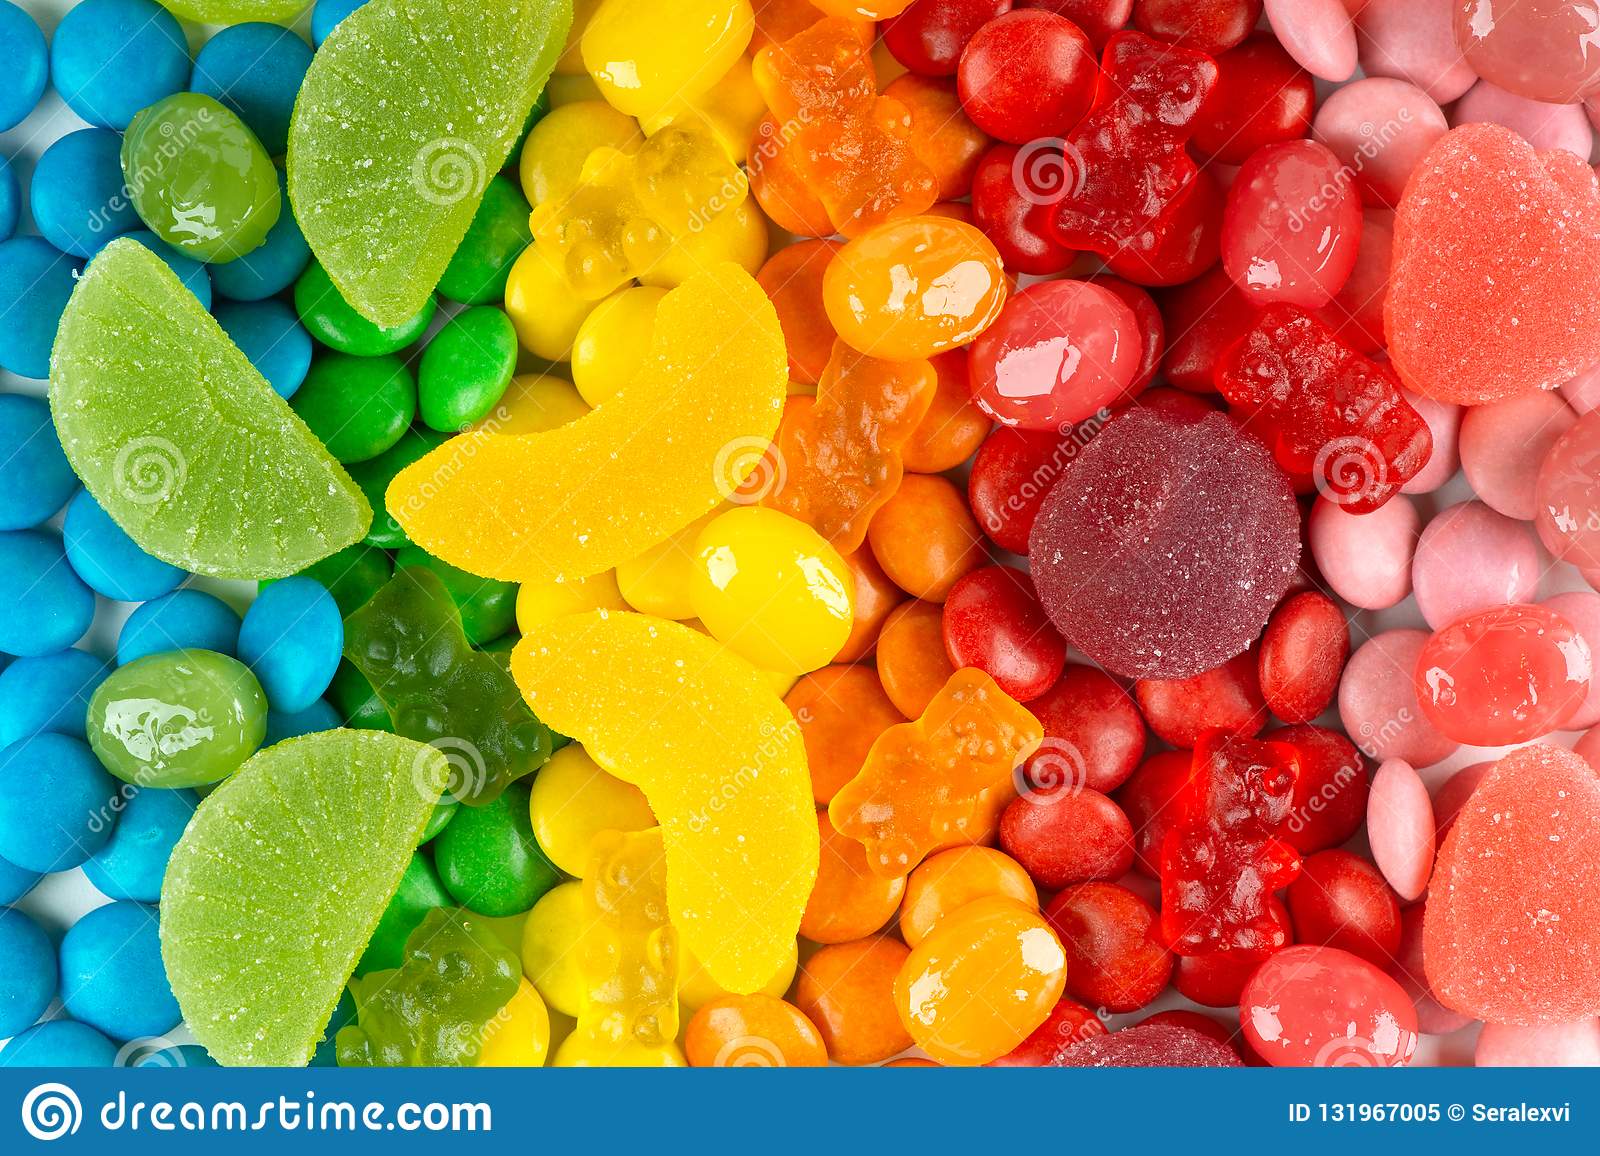 background-mixed-colorful-candies-color-sweets-texture-13196705.jpg